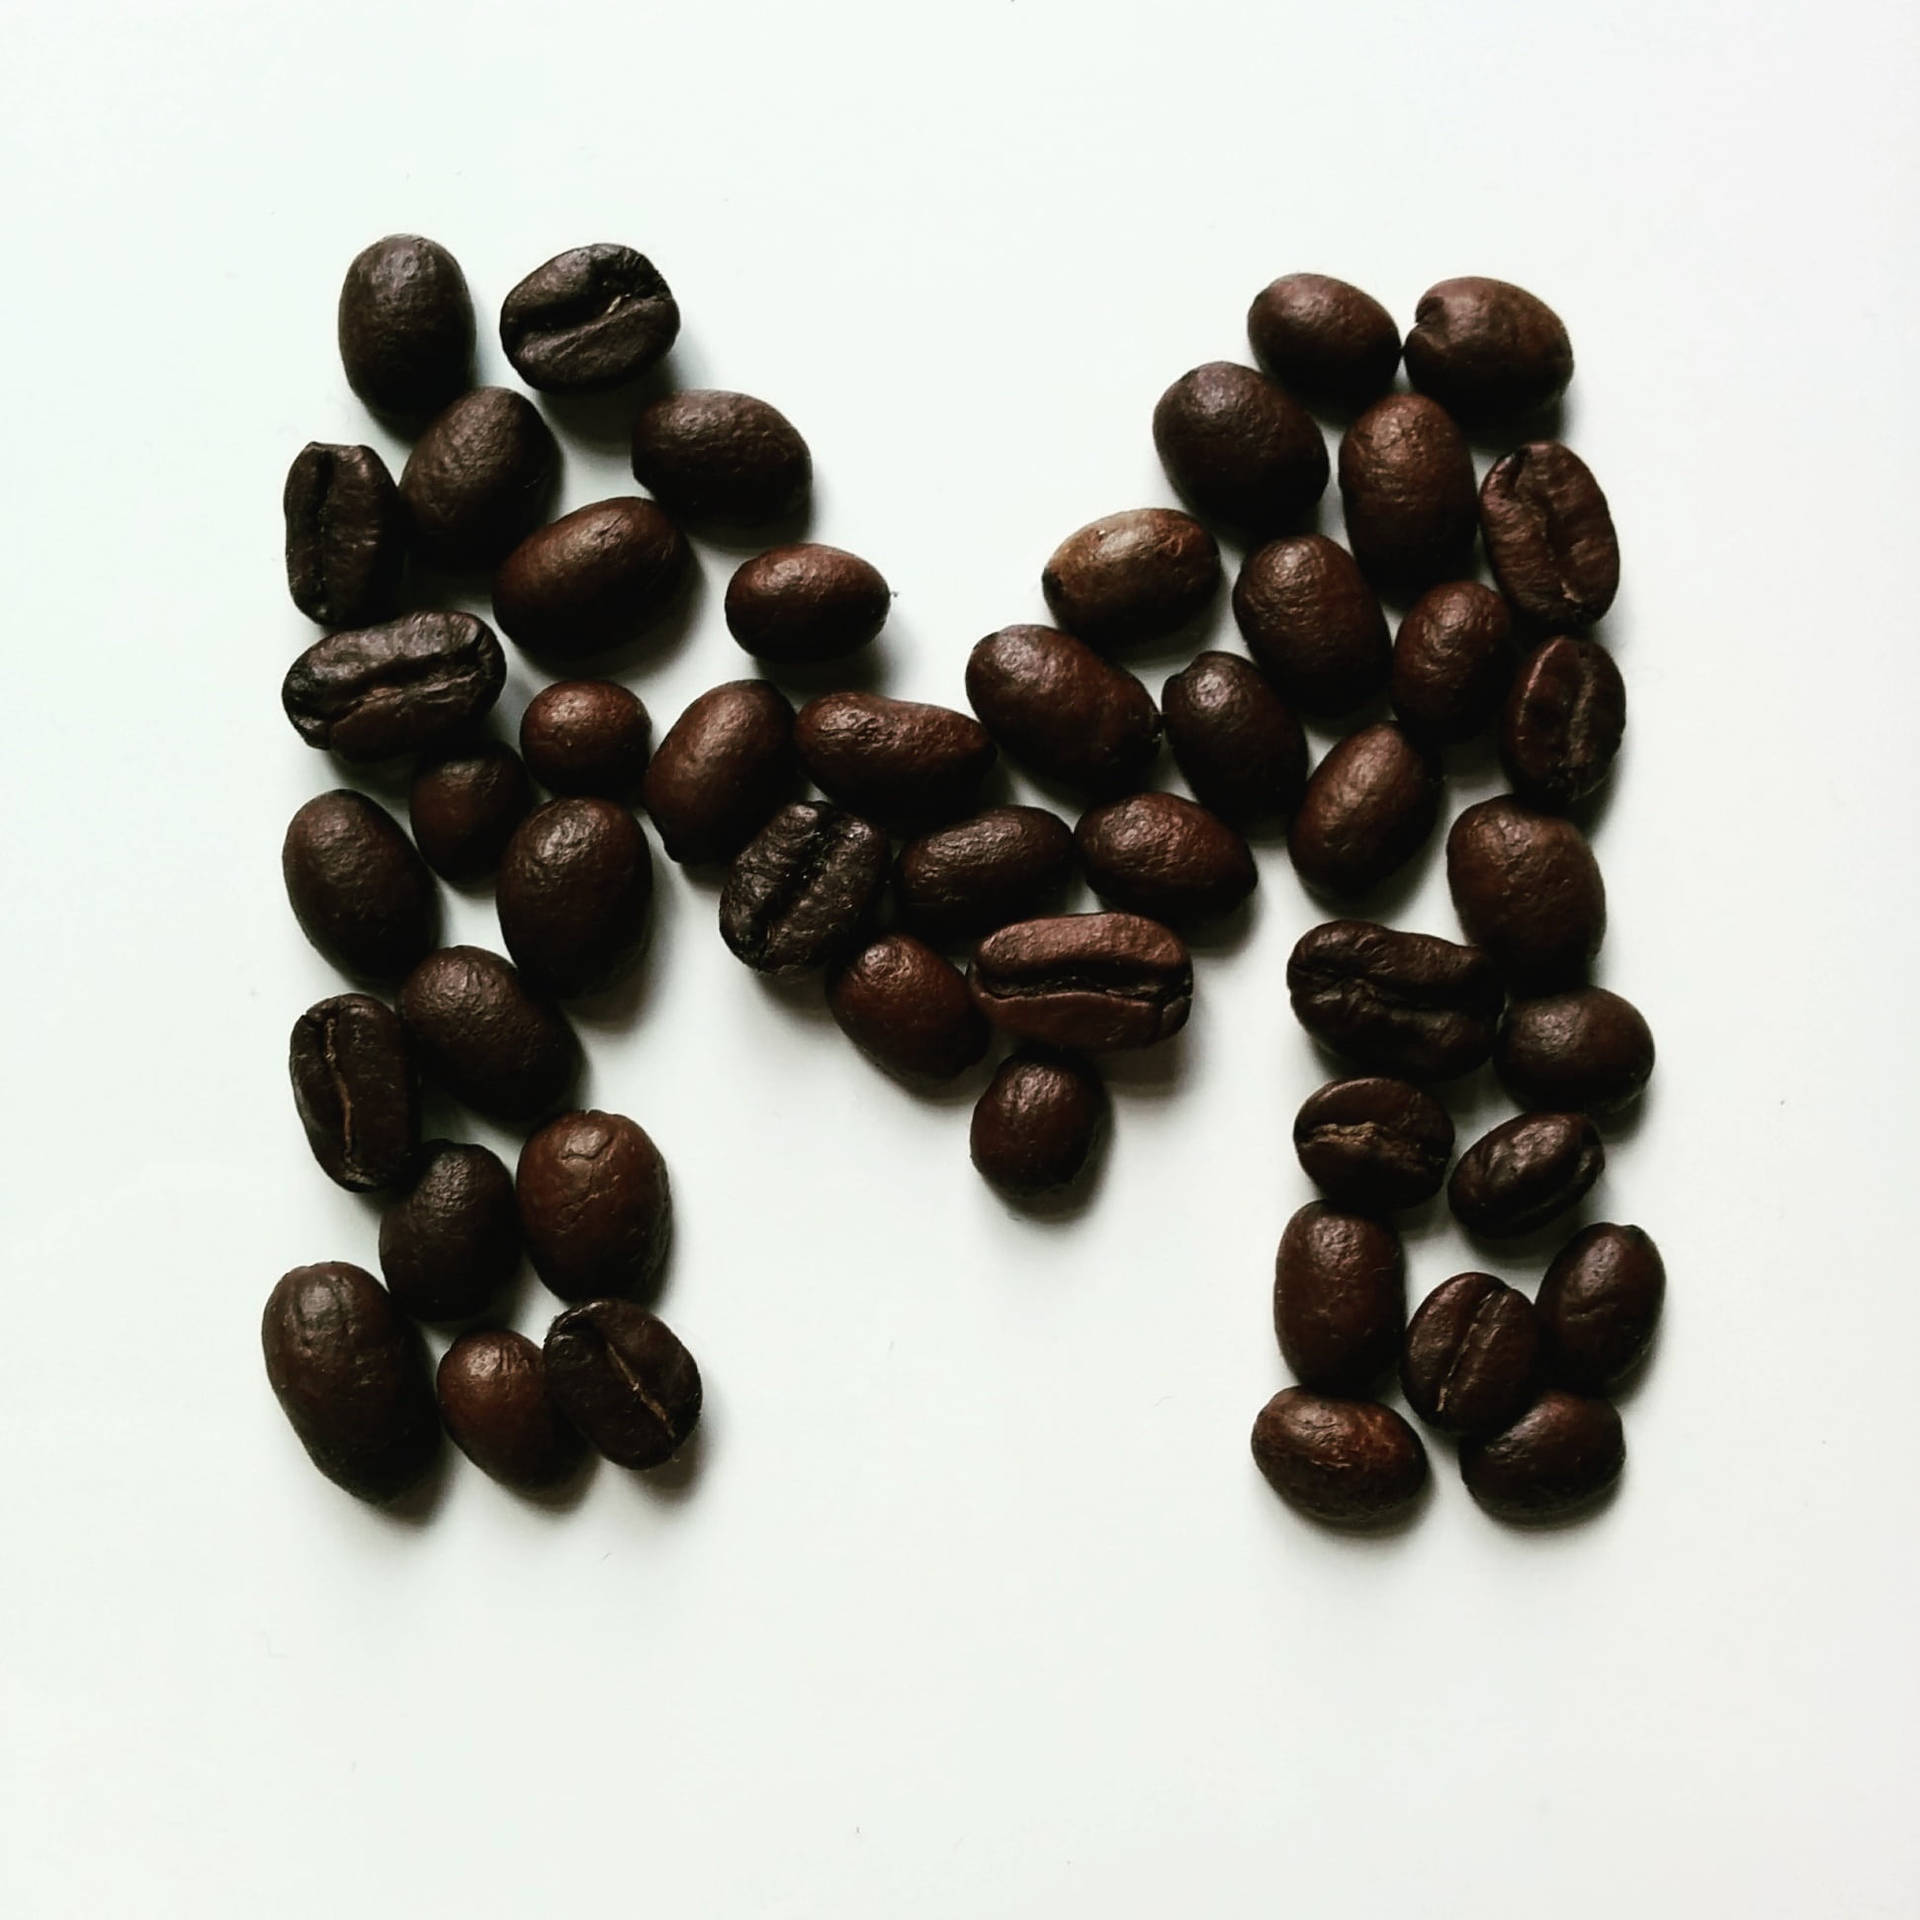 Letter M Formed With Coffee Beans Background